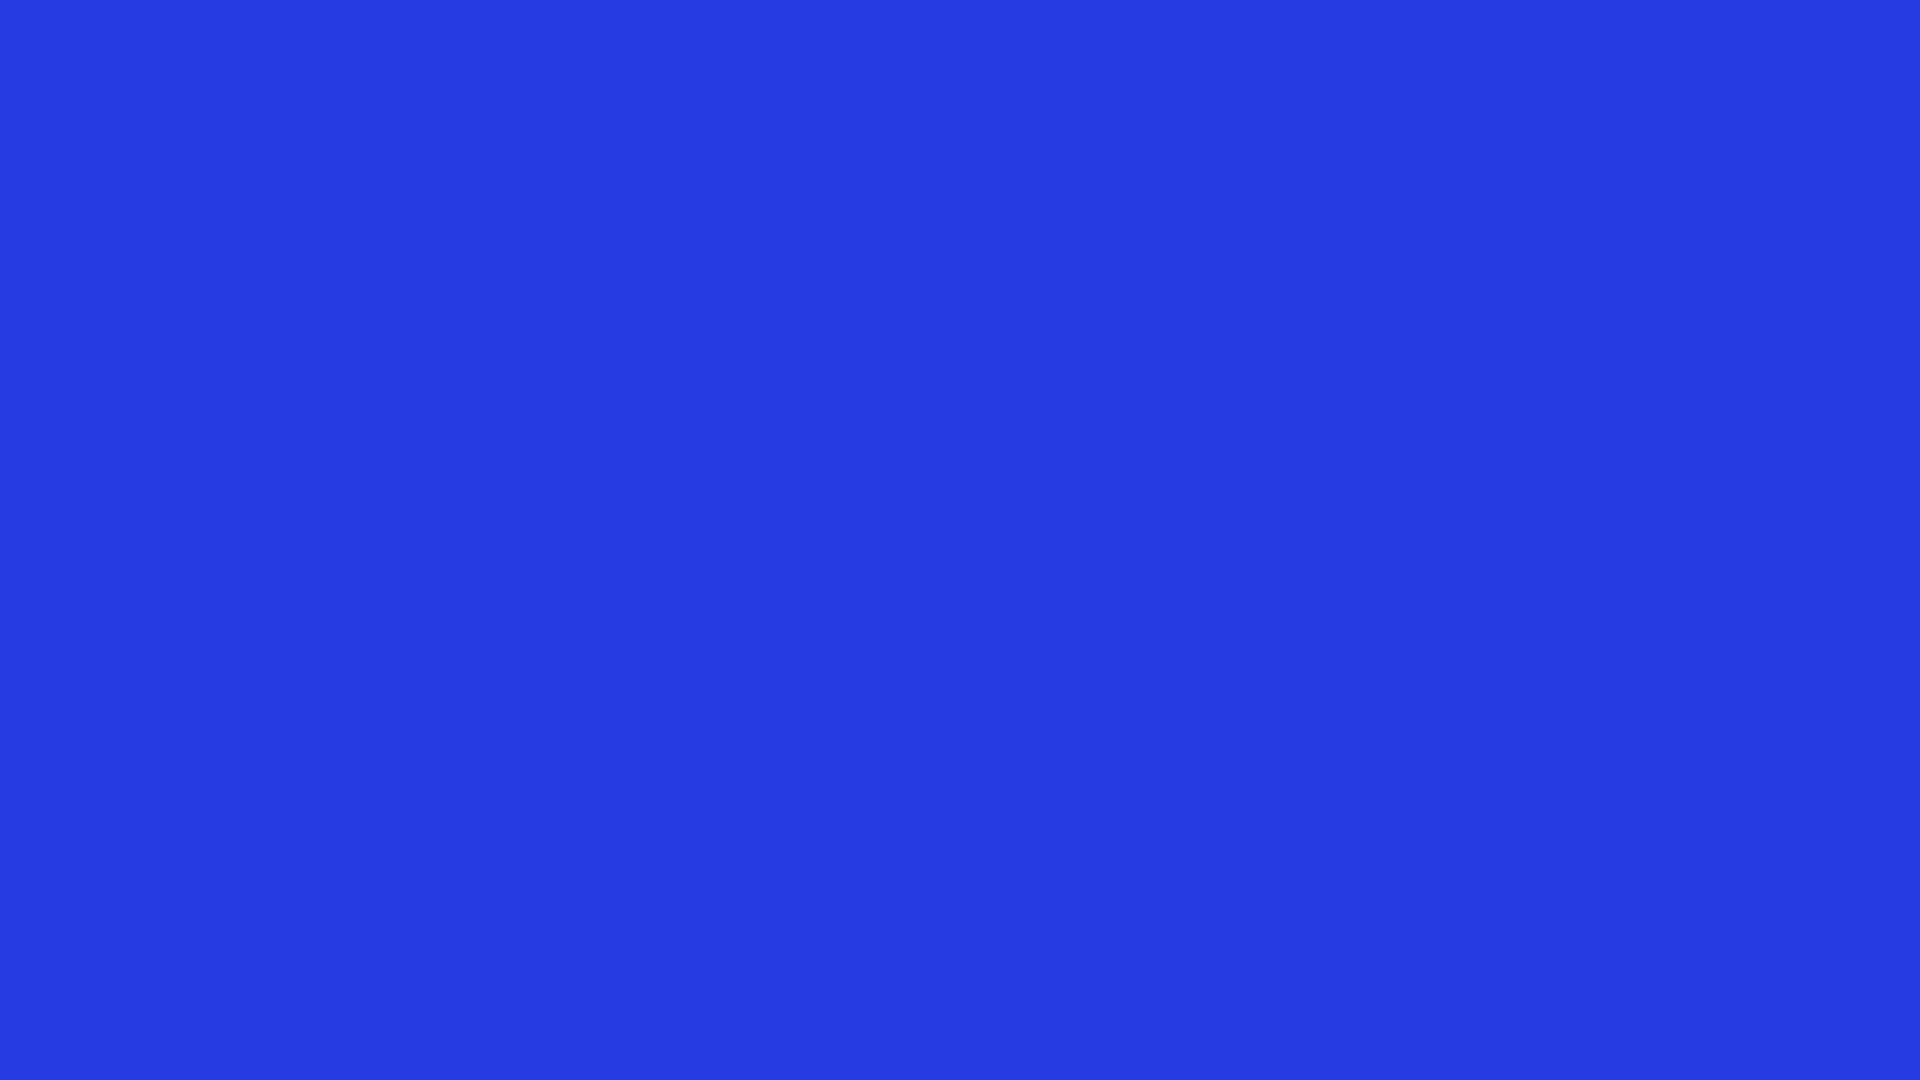 1920x1080 Palatinate Blue Solid Color Background